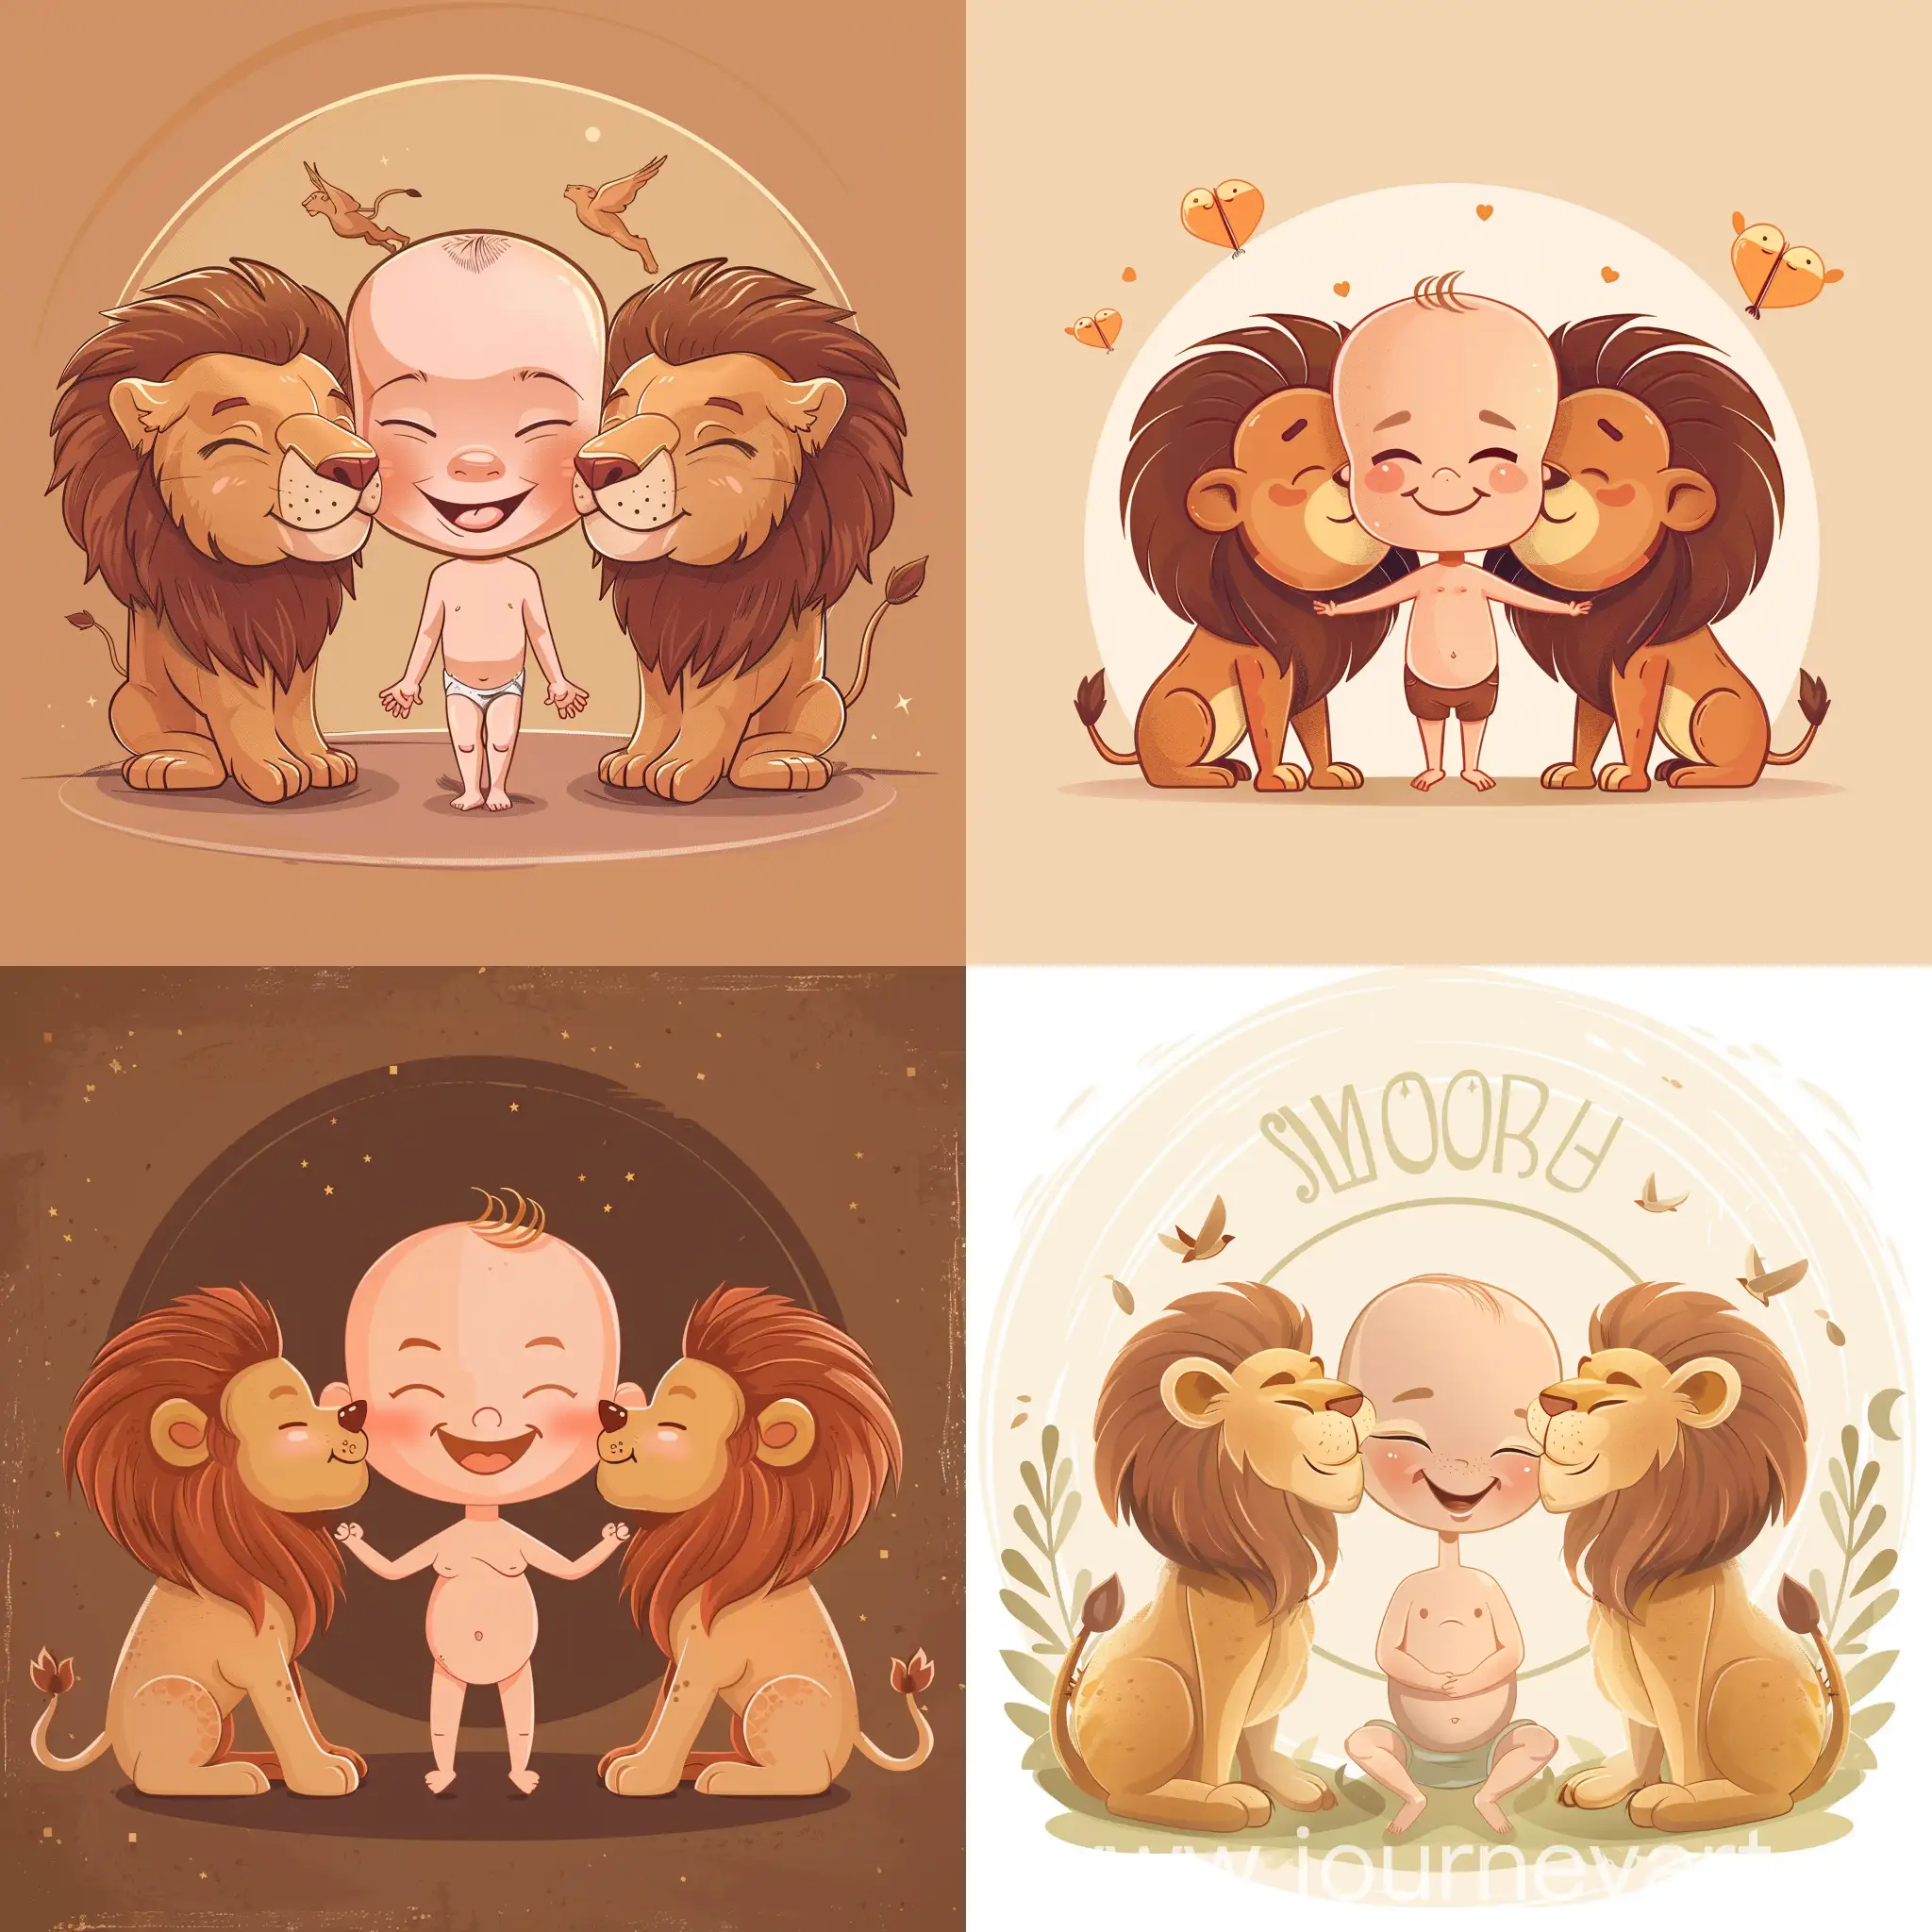 Cheerful-Baby-with-Affectionate-Lions-Cartoon-Portrait-in-Flat-Style